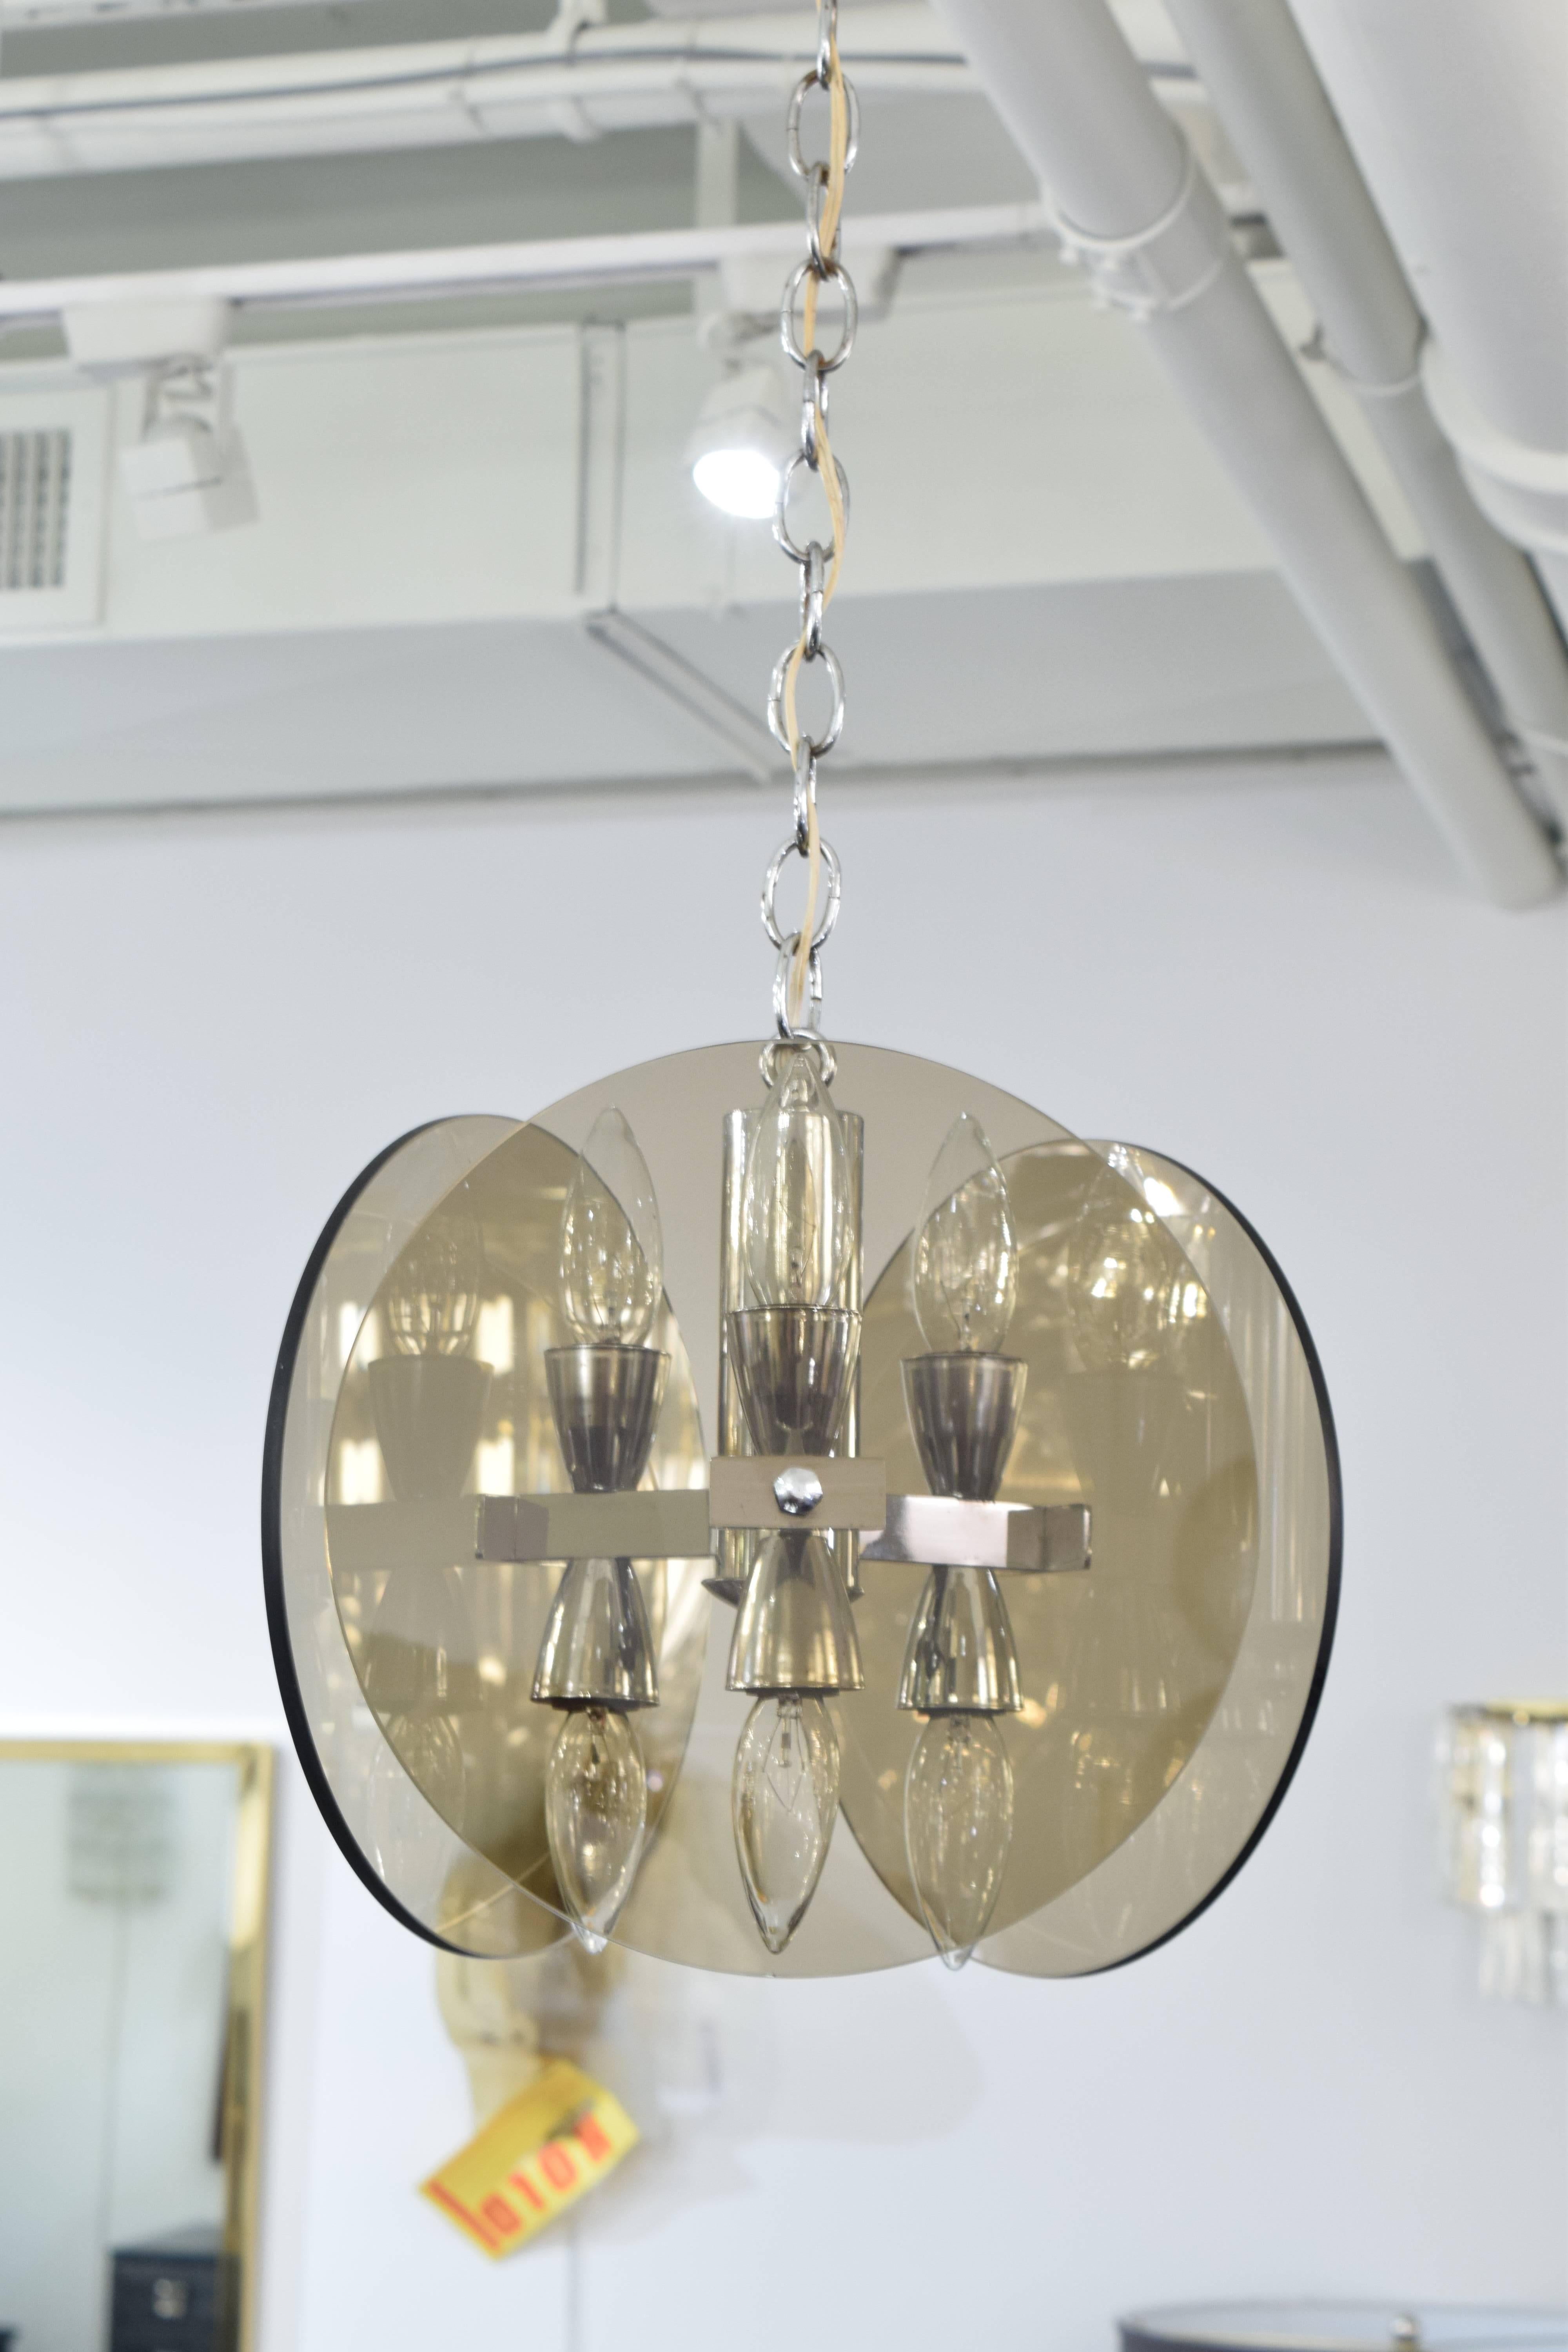 A smoked glass three bulb chandelier in the style of Fontana Arte, with three glass circles each with a diameter of 12